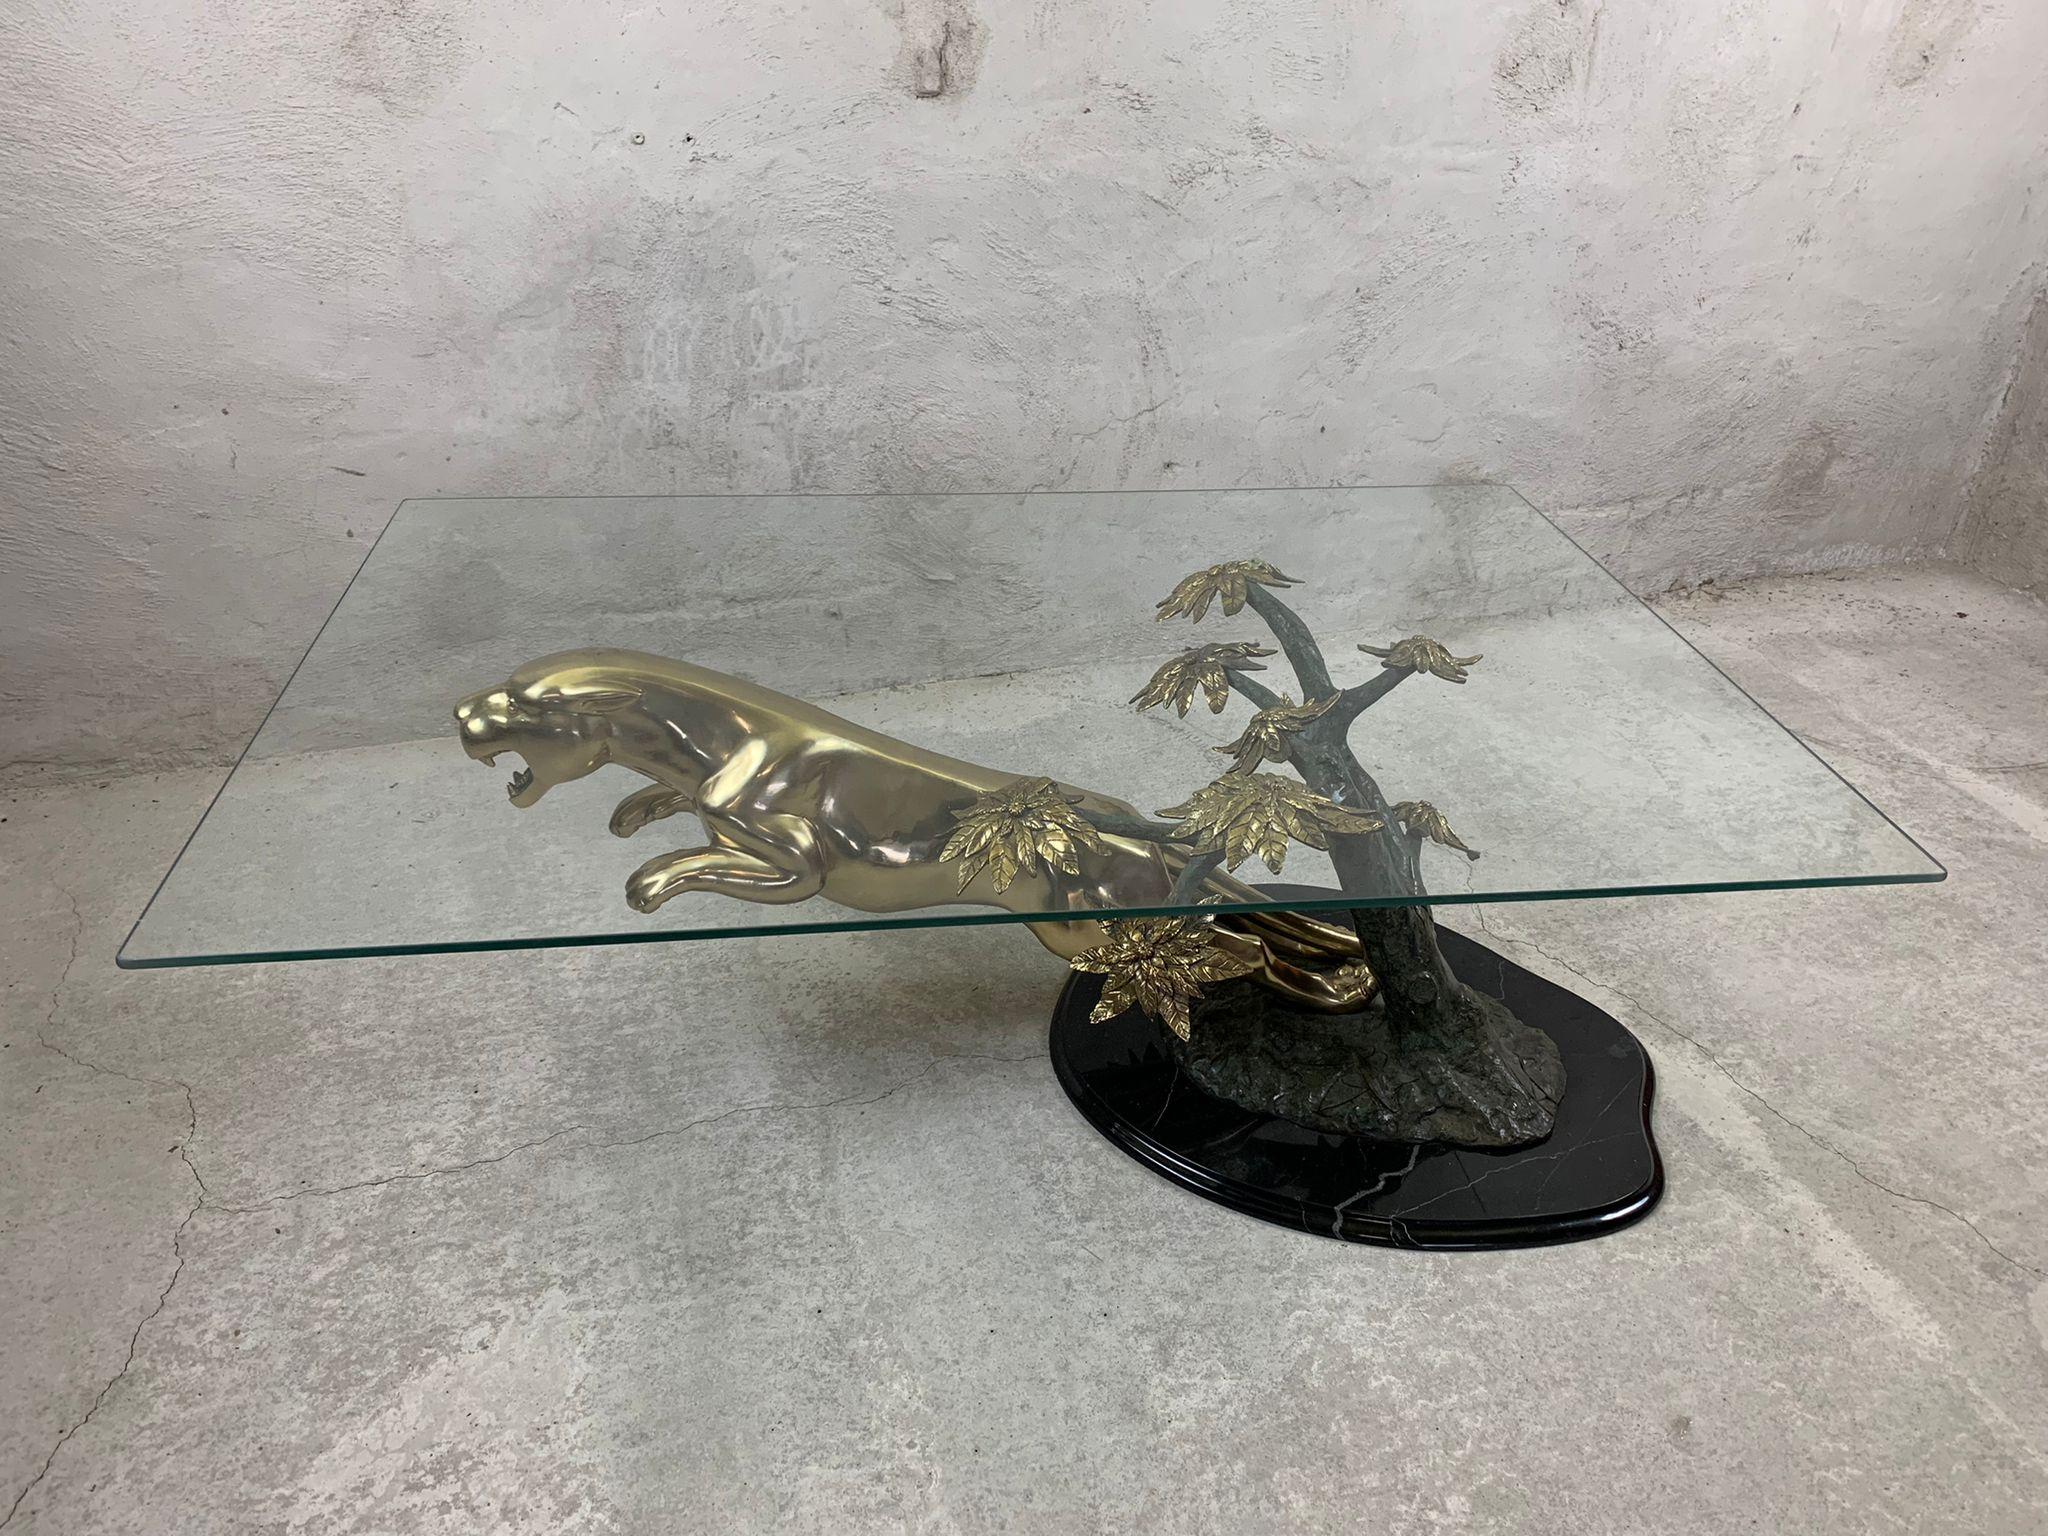 Spectacular coffee table depicting a leaping jaguar which has been sculpted nicely and made from brass.

It is mounted on a black marble base which features a bronze tree with sculpted brass flowers supporting a clear glass top.

1970s - Belgium